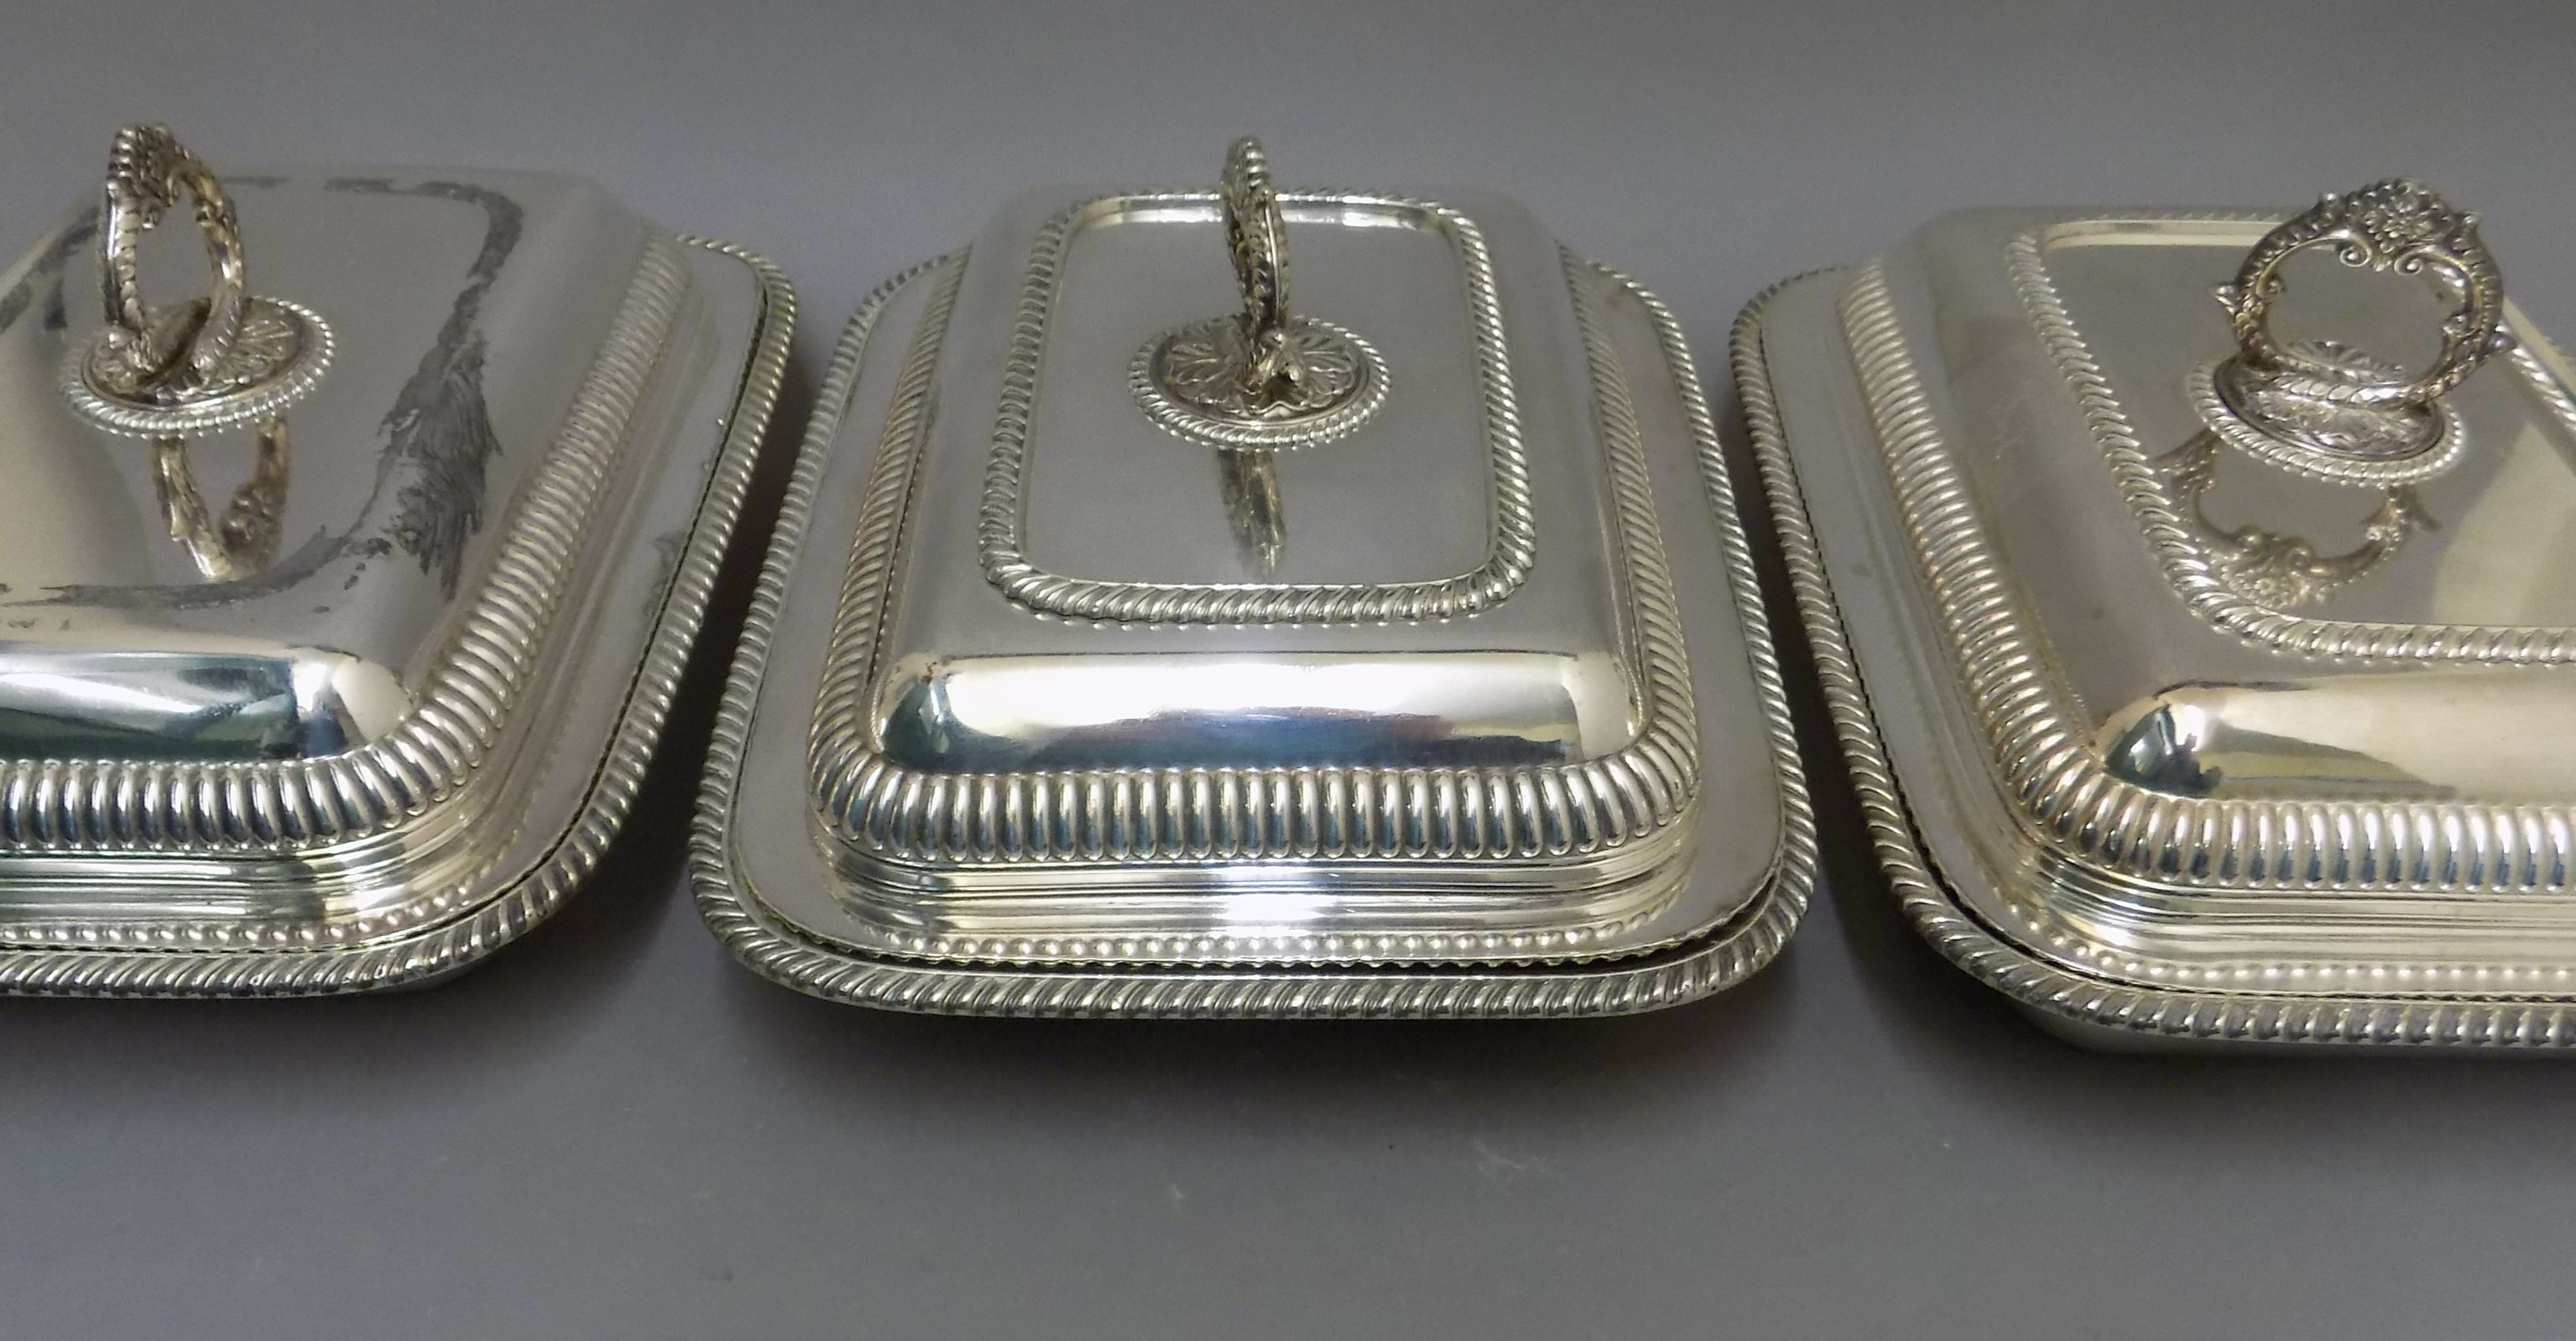 3 PLATED ENTREE DISHES & COVERS (CRESTED)